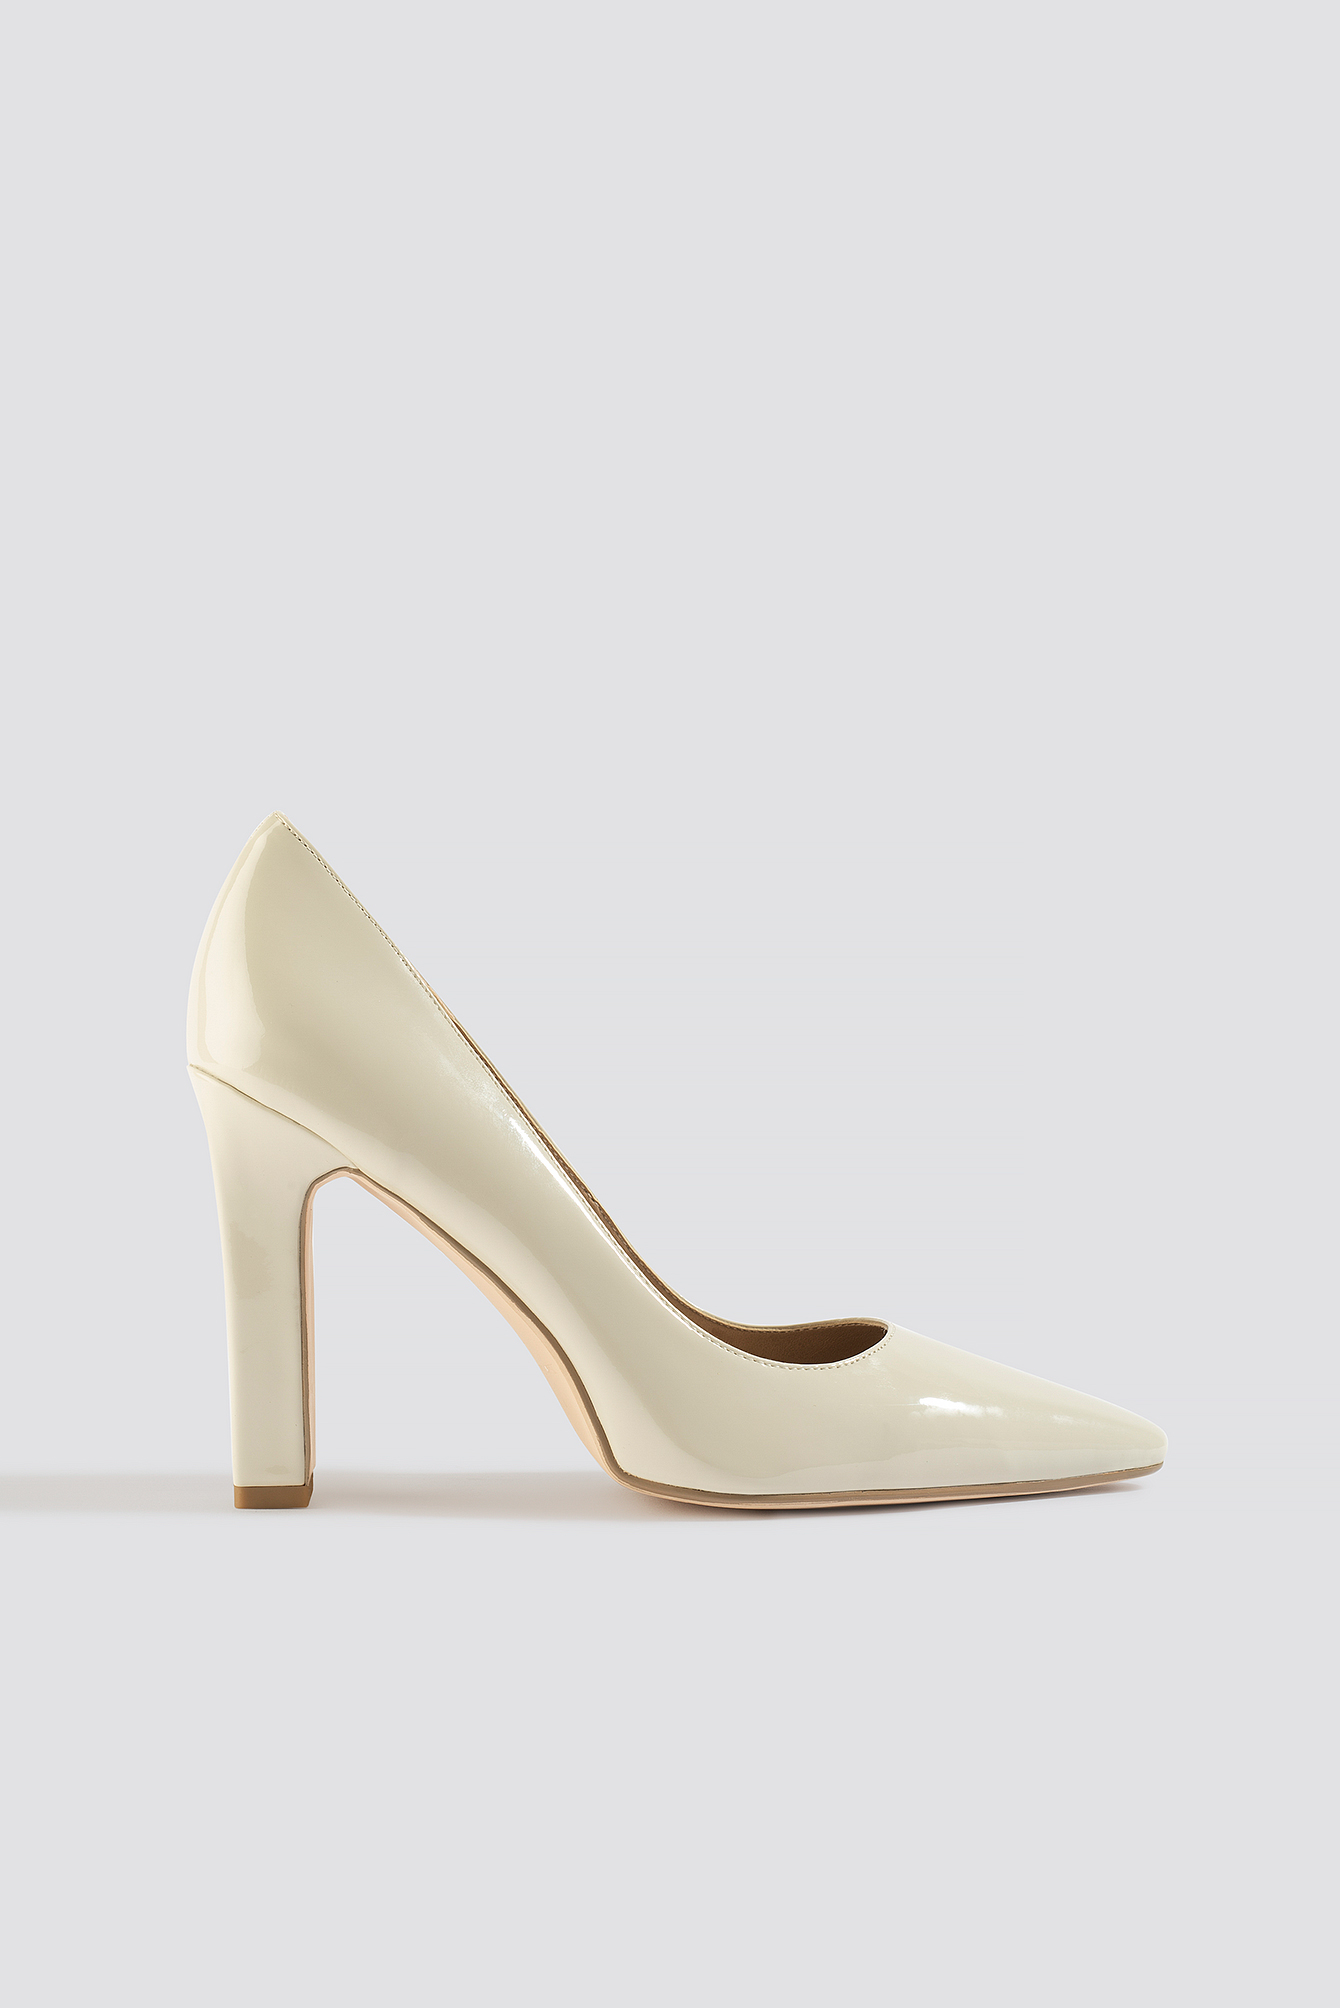 Nude Rounded Toe Pumps